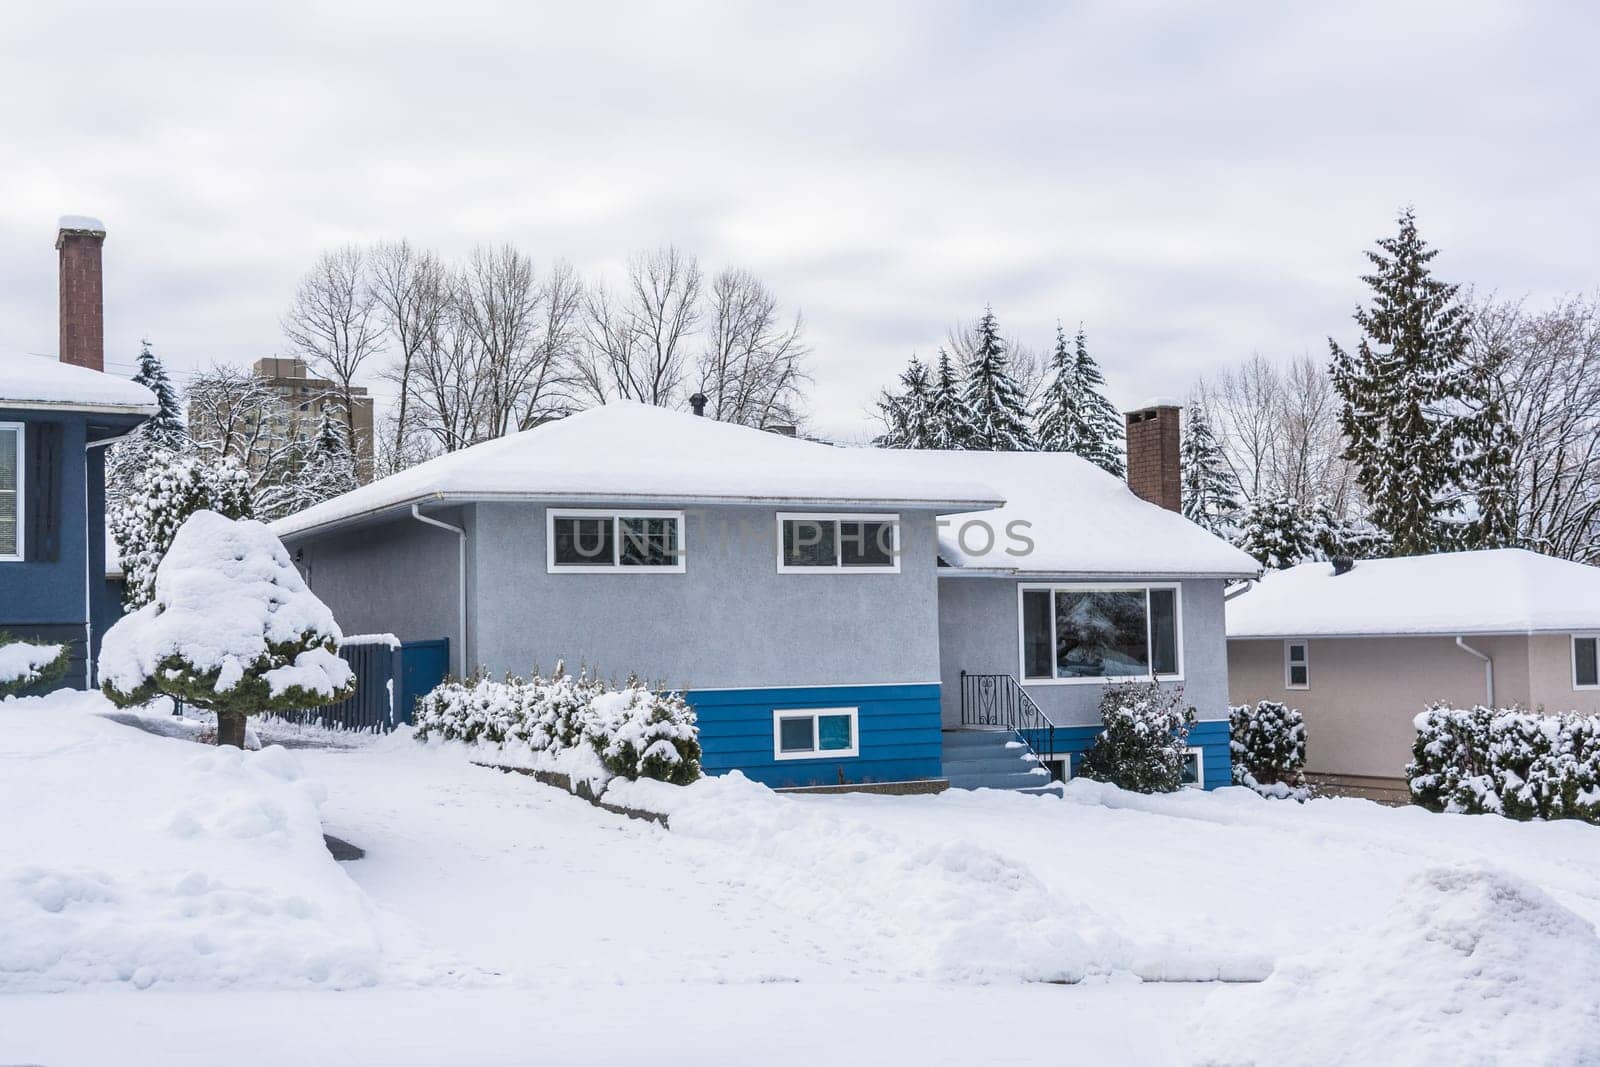 Family residential house with front yard in snow on winter cloudy day by Imagenet